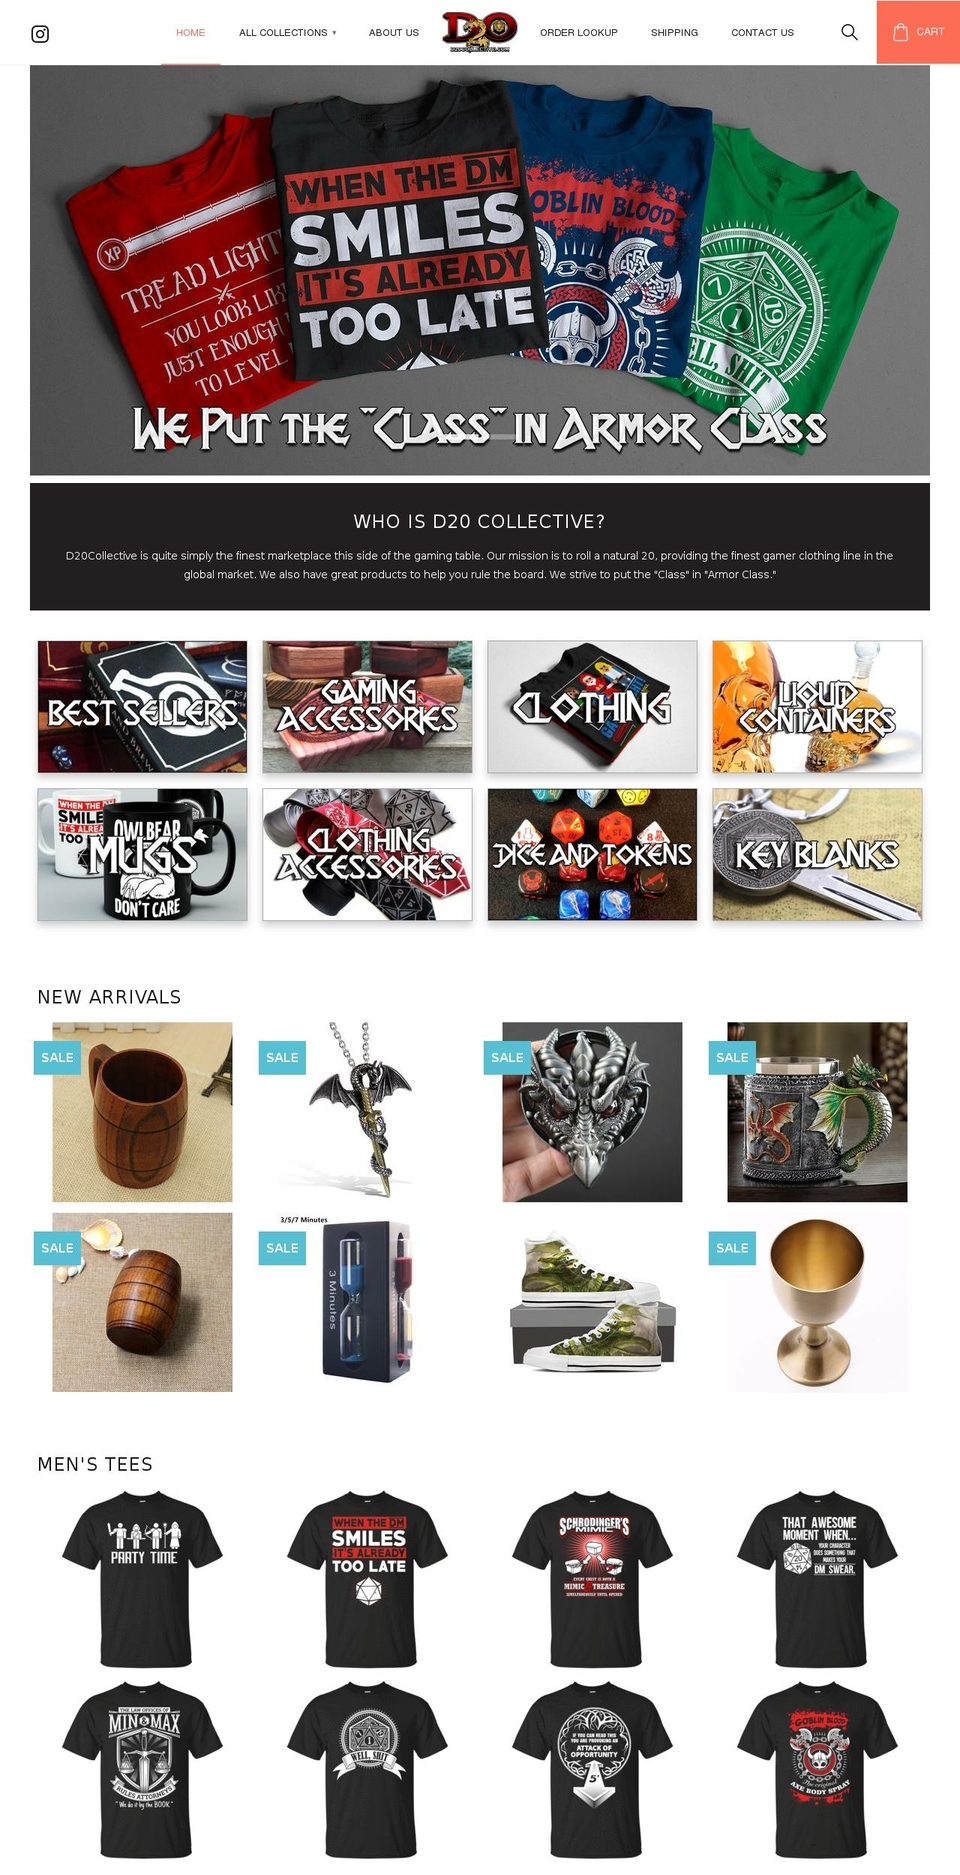 warehouse Shopify theme site example d20collective.com